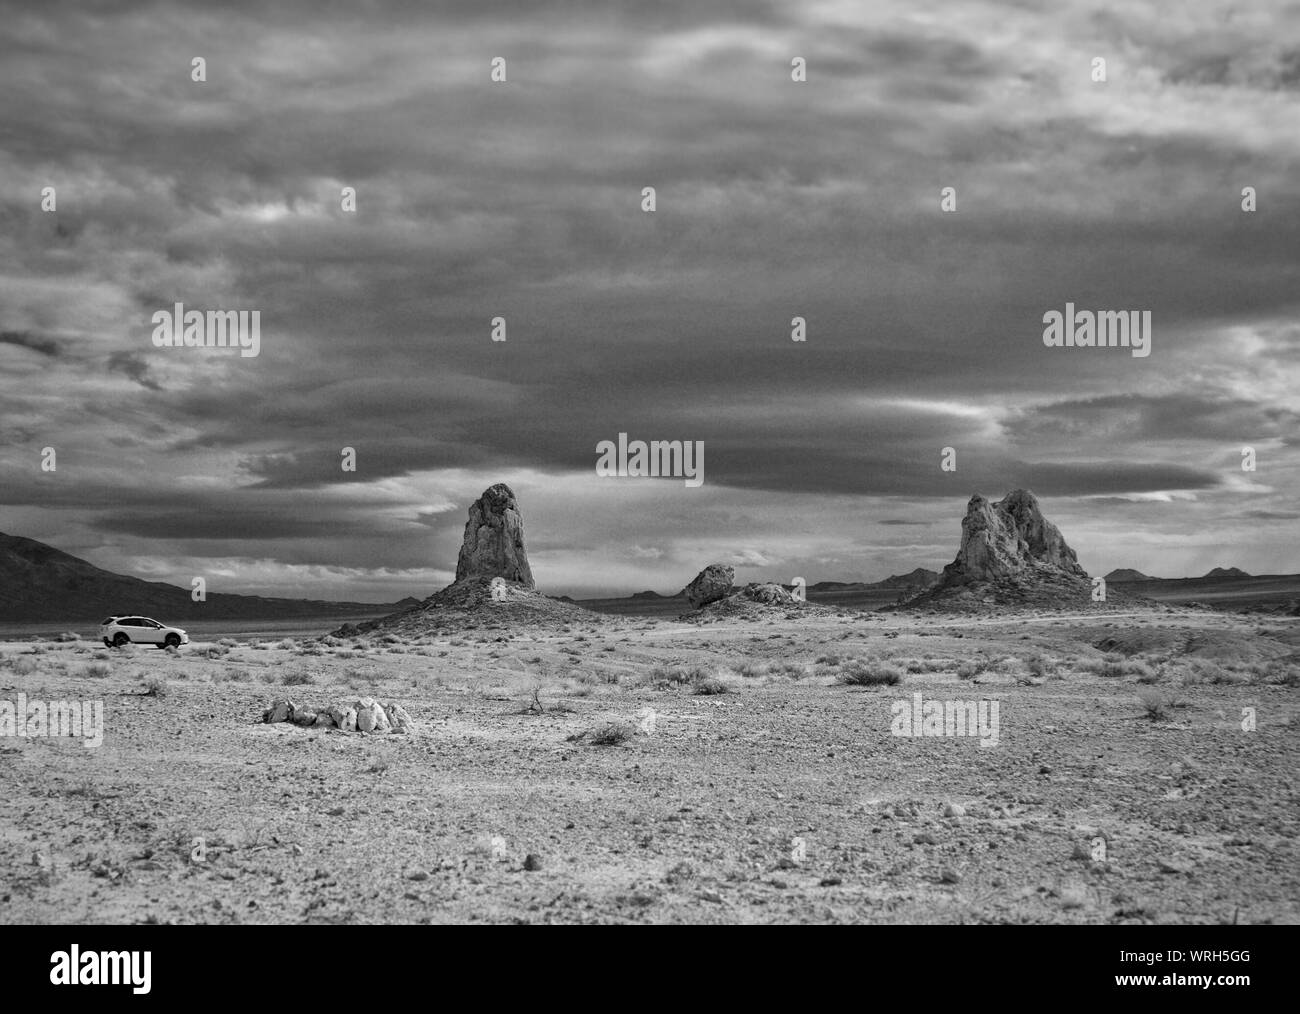 Rock Formation At Trona Pinnacles Against Cloudy Sky Stock Photo